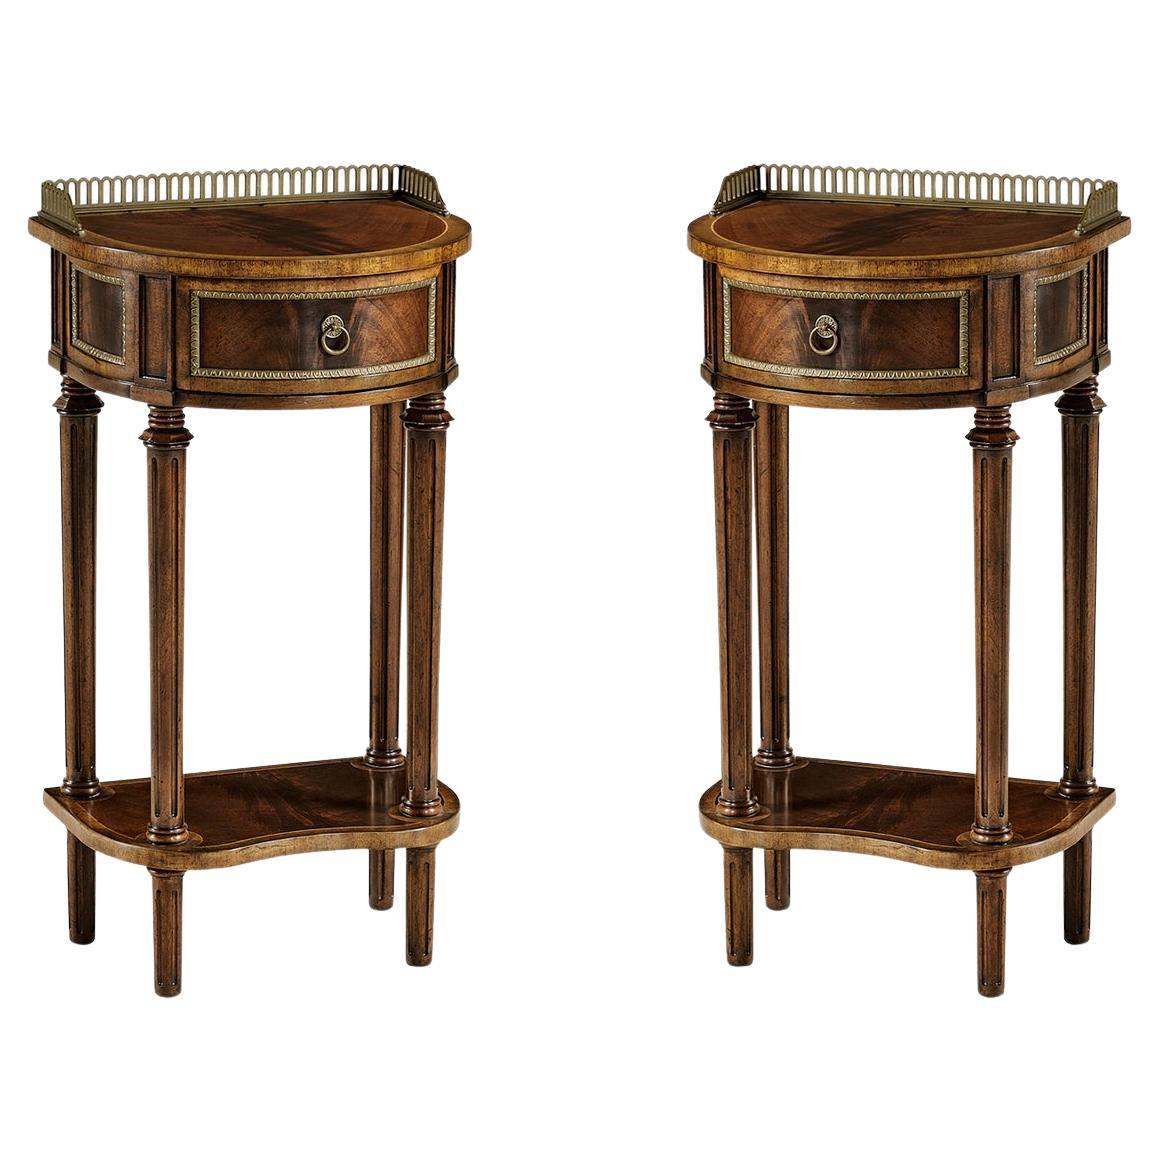 Pair of George III Style Mahogany Demilune Console Tables